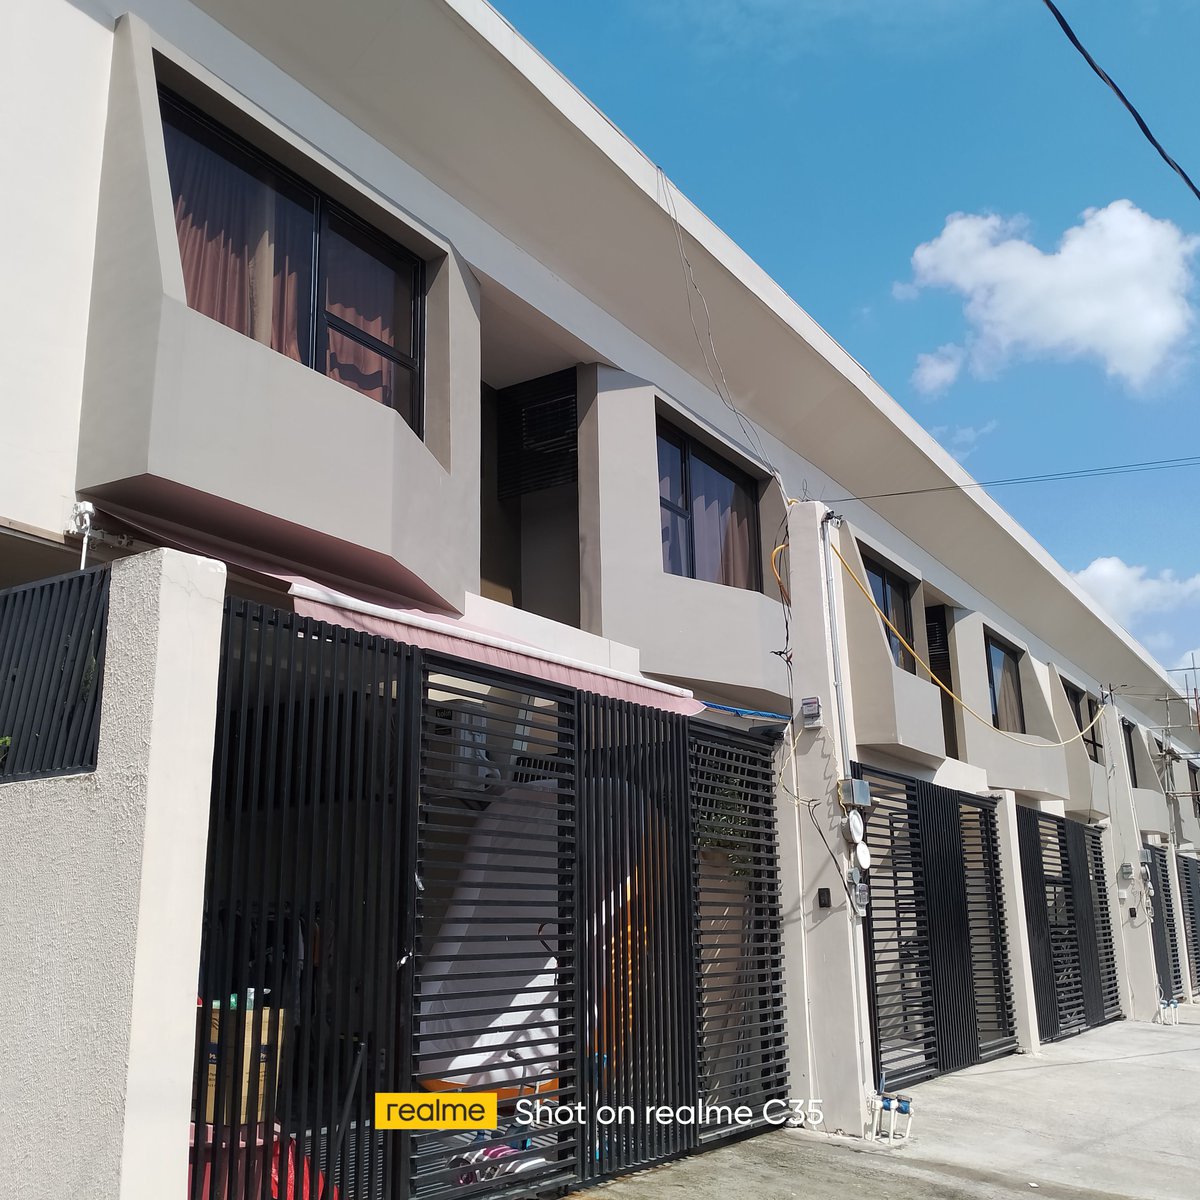 3bedrooms townhouse for sale in antipolo rizal